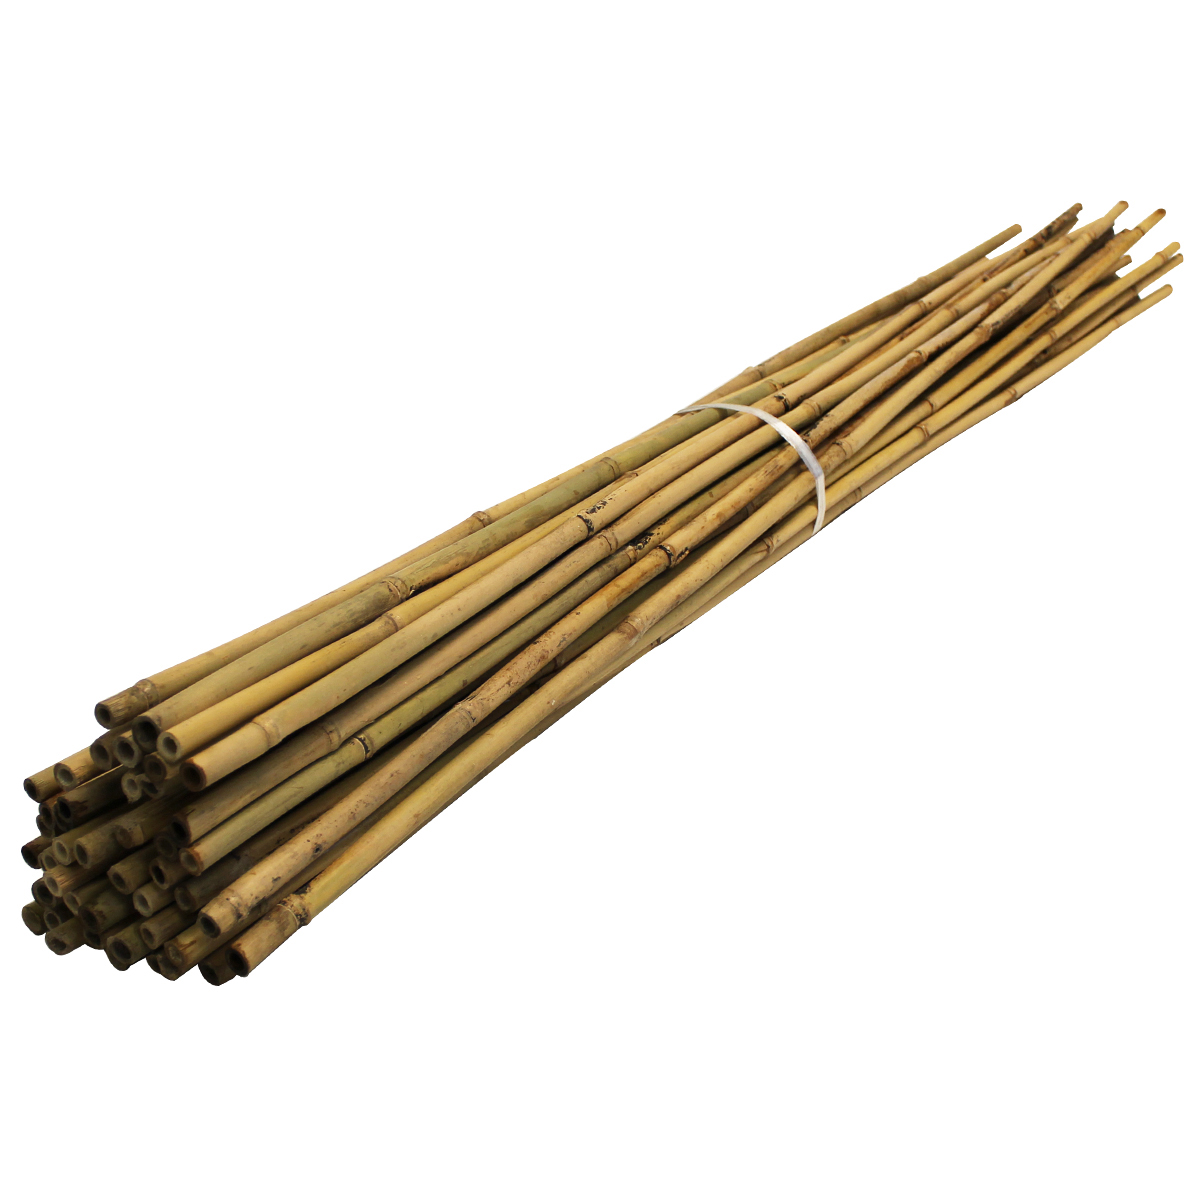 Plant Growth MultQTY Strong Heavy Duty Garden Canes for Support BAMBOO CANES 